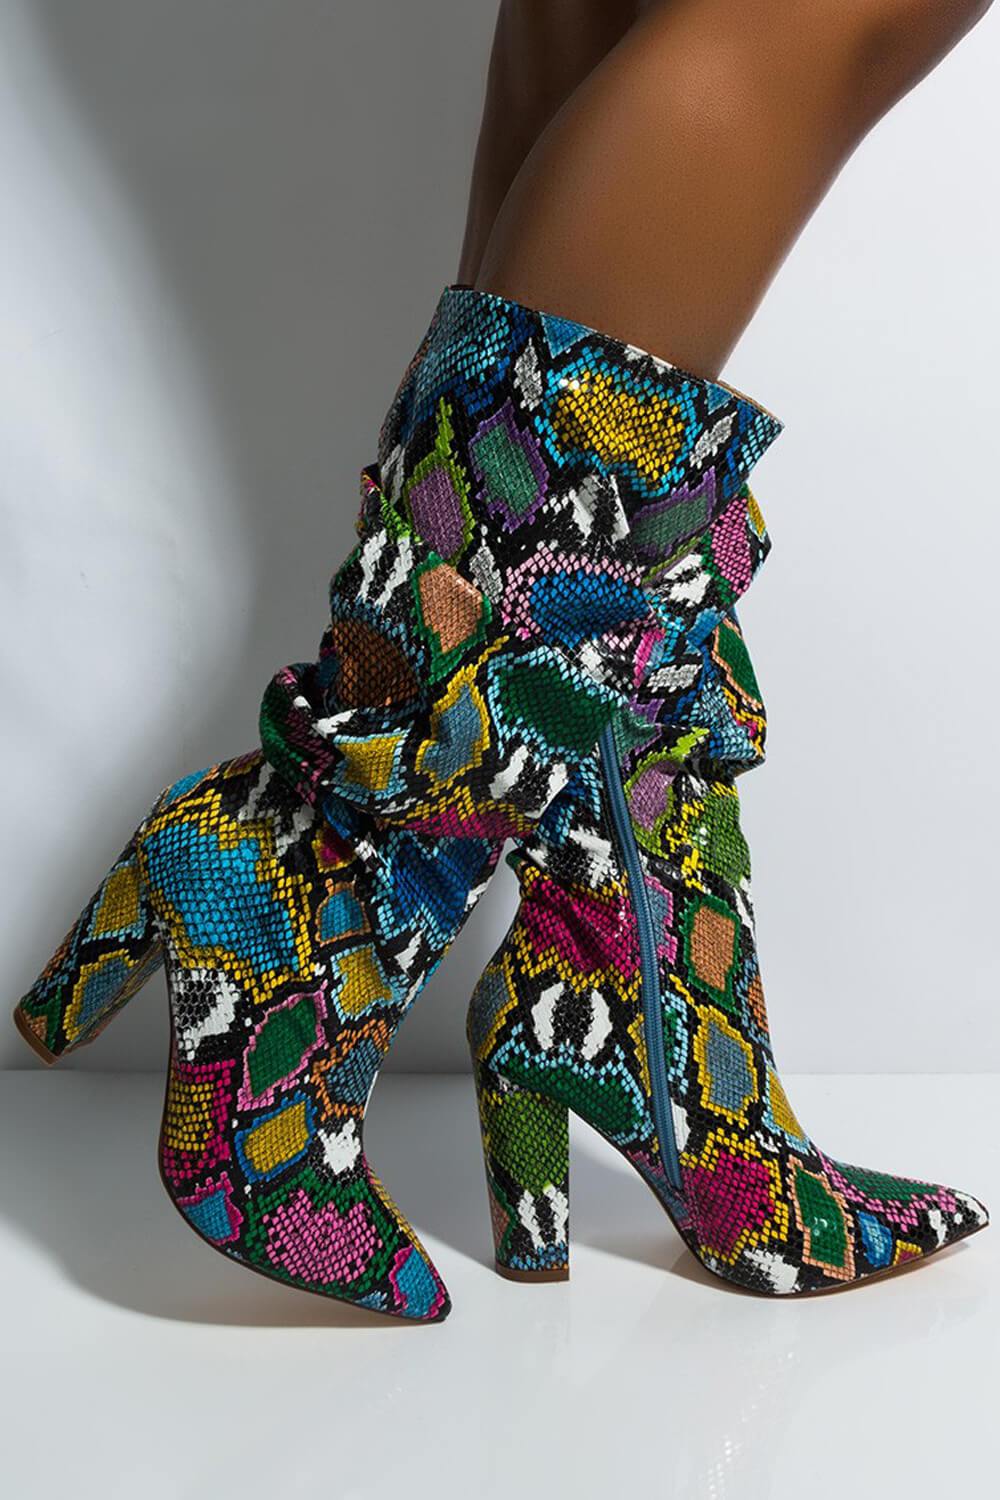 Multi-Colored Python Print Ruched Knee High Boots (4308210122811)